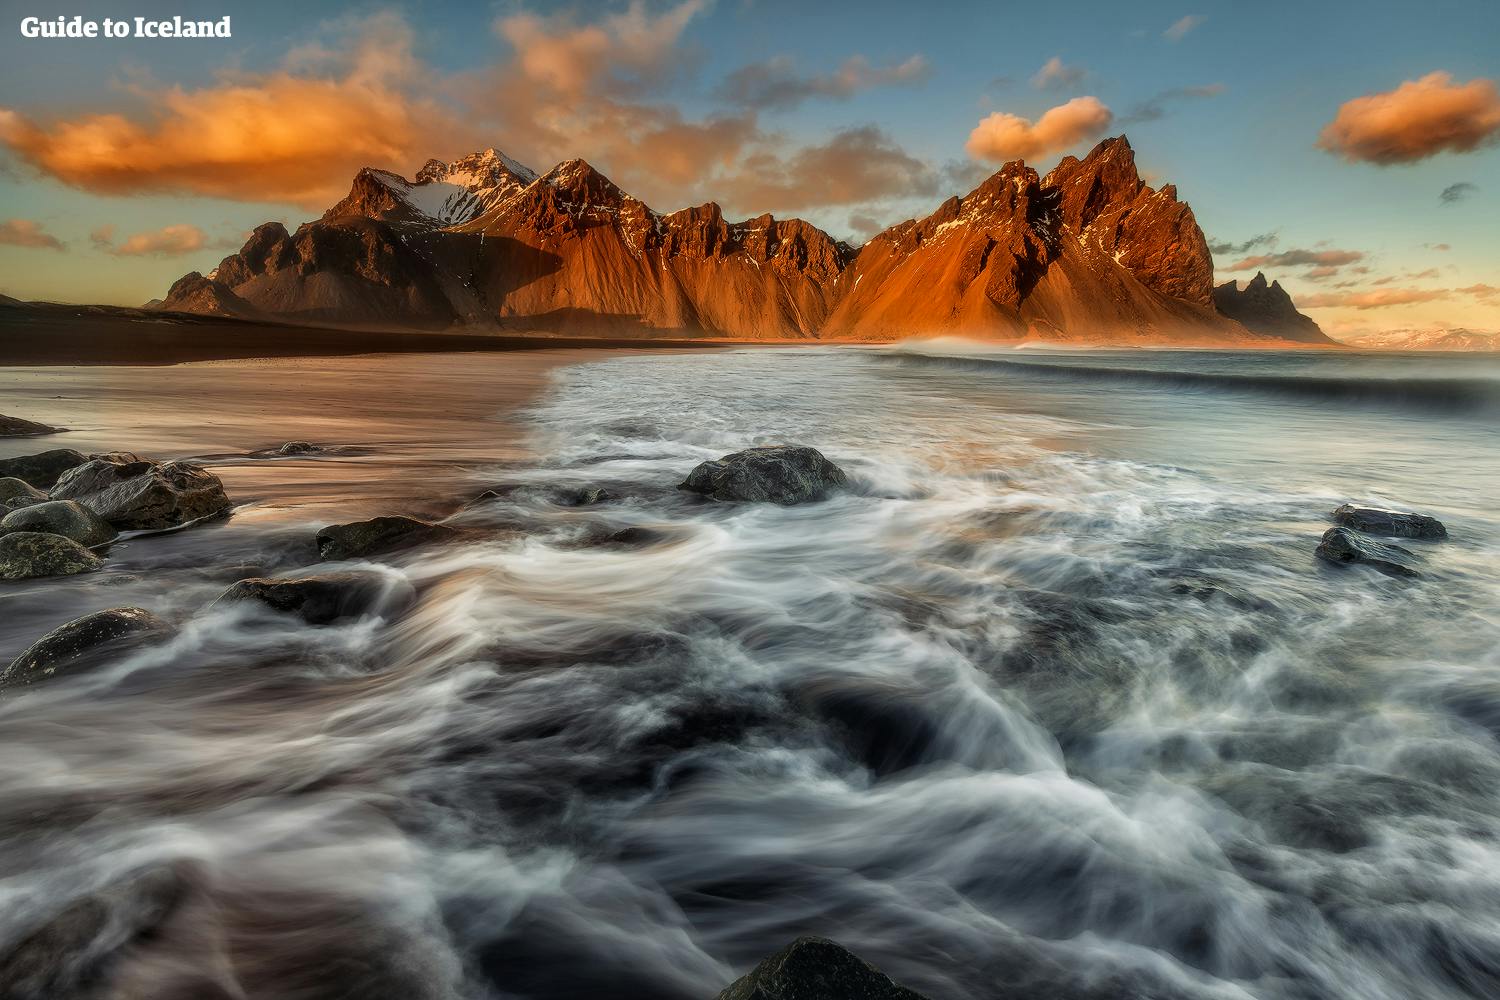 The mesmerising Vestrahorn mountain is a worthy detour outside the town of Höfn.